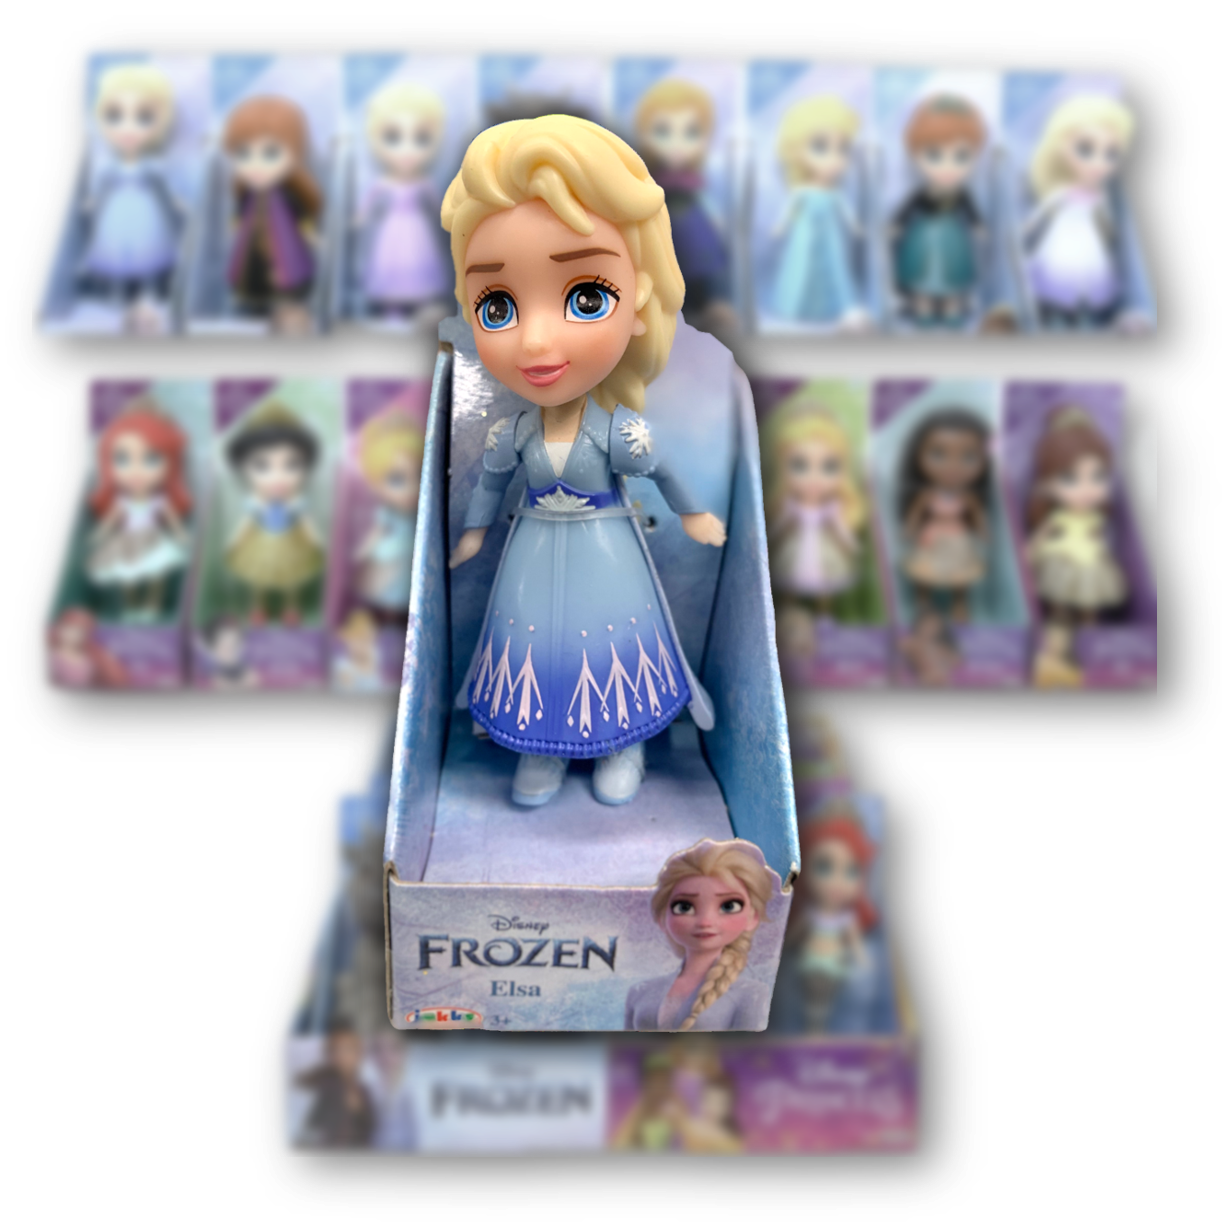 Disney Frozen Mini Poseable Miniature 3.5 Doll Figure Young ELSA Navy Dress  Packed in Clear Display Box 